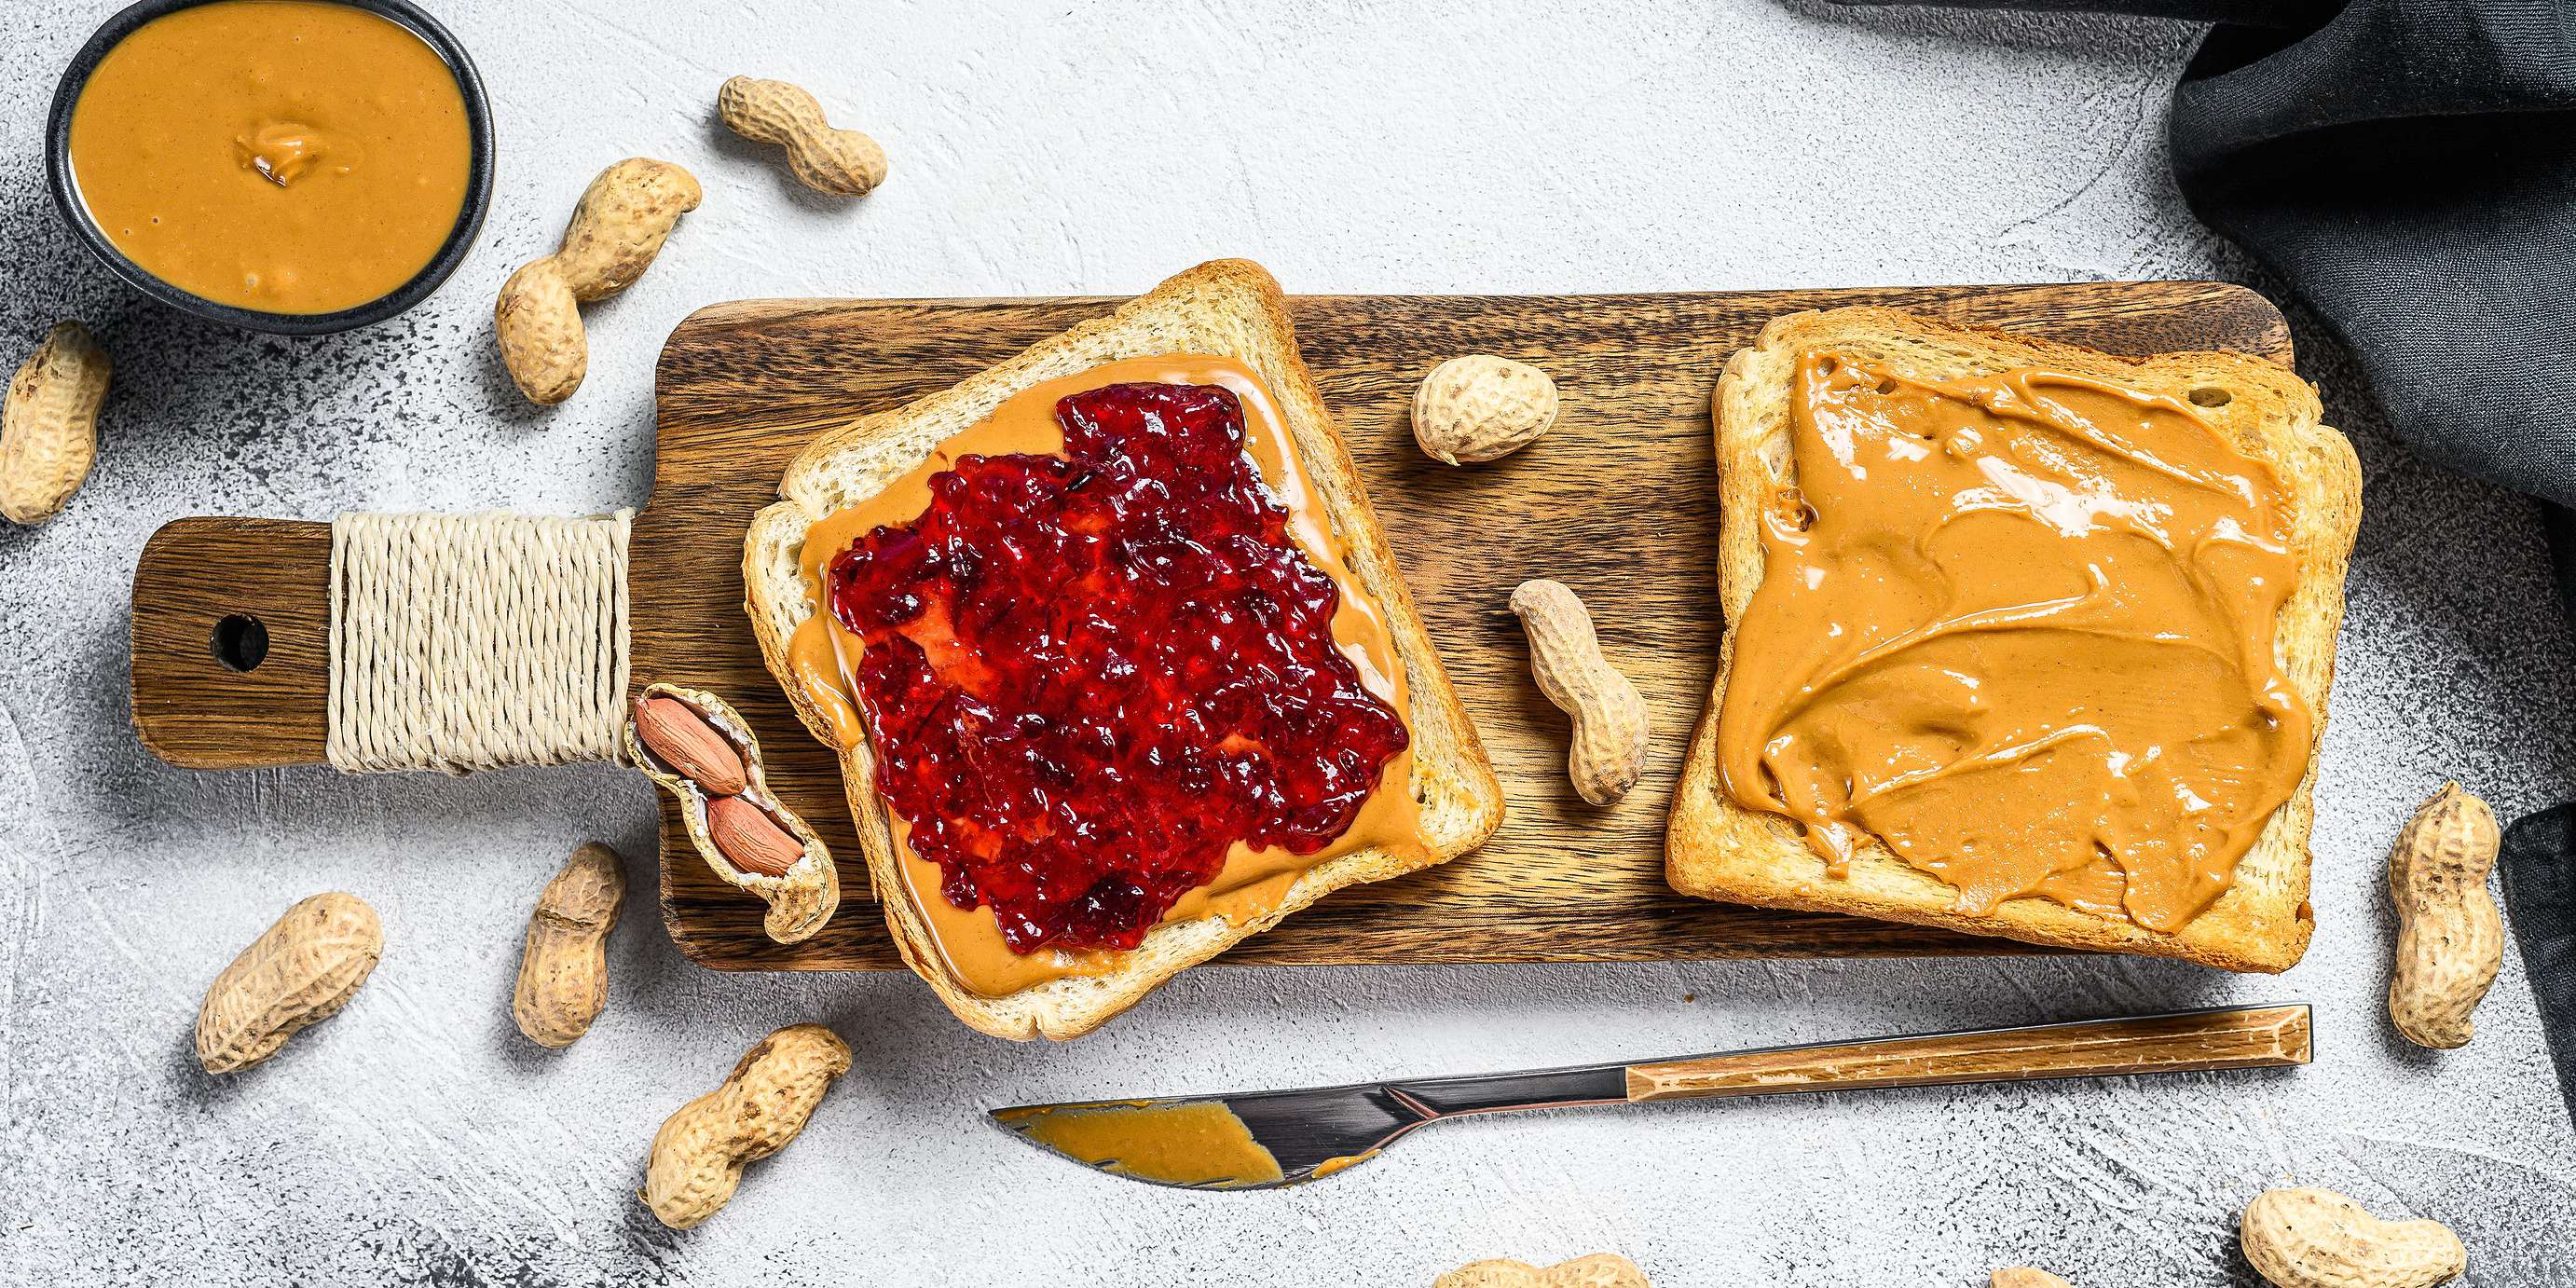 Protein Plus Peanut Butter and Jelly Sandwich